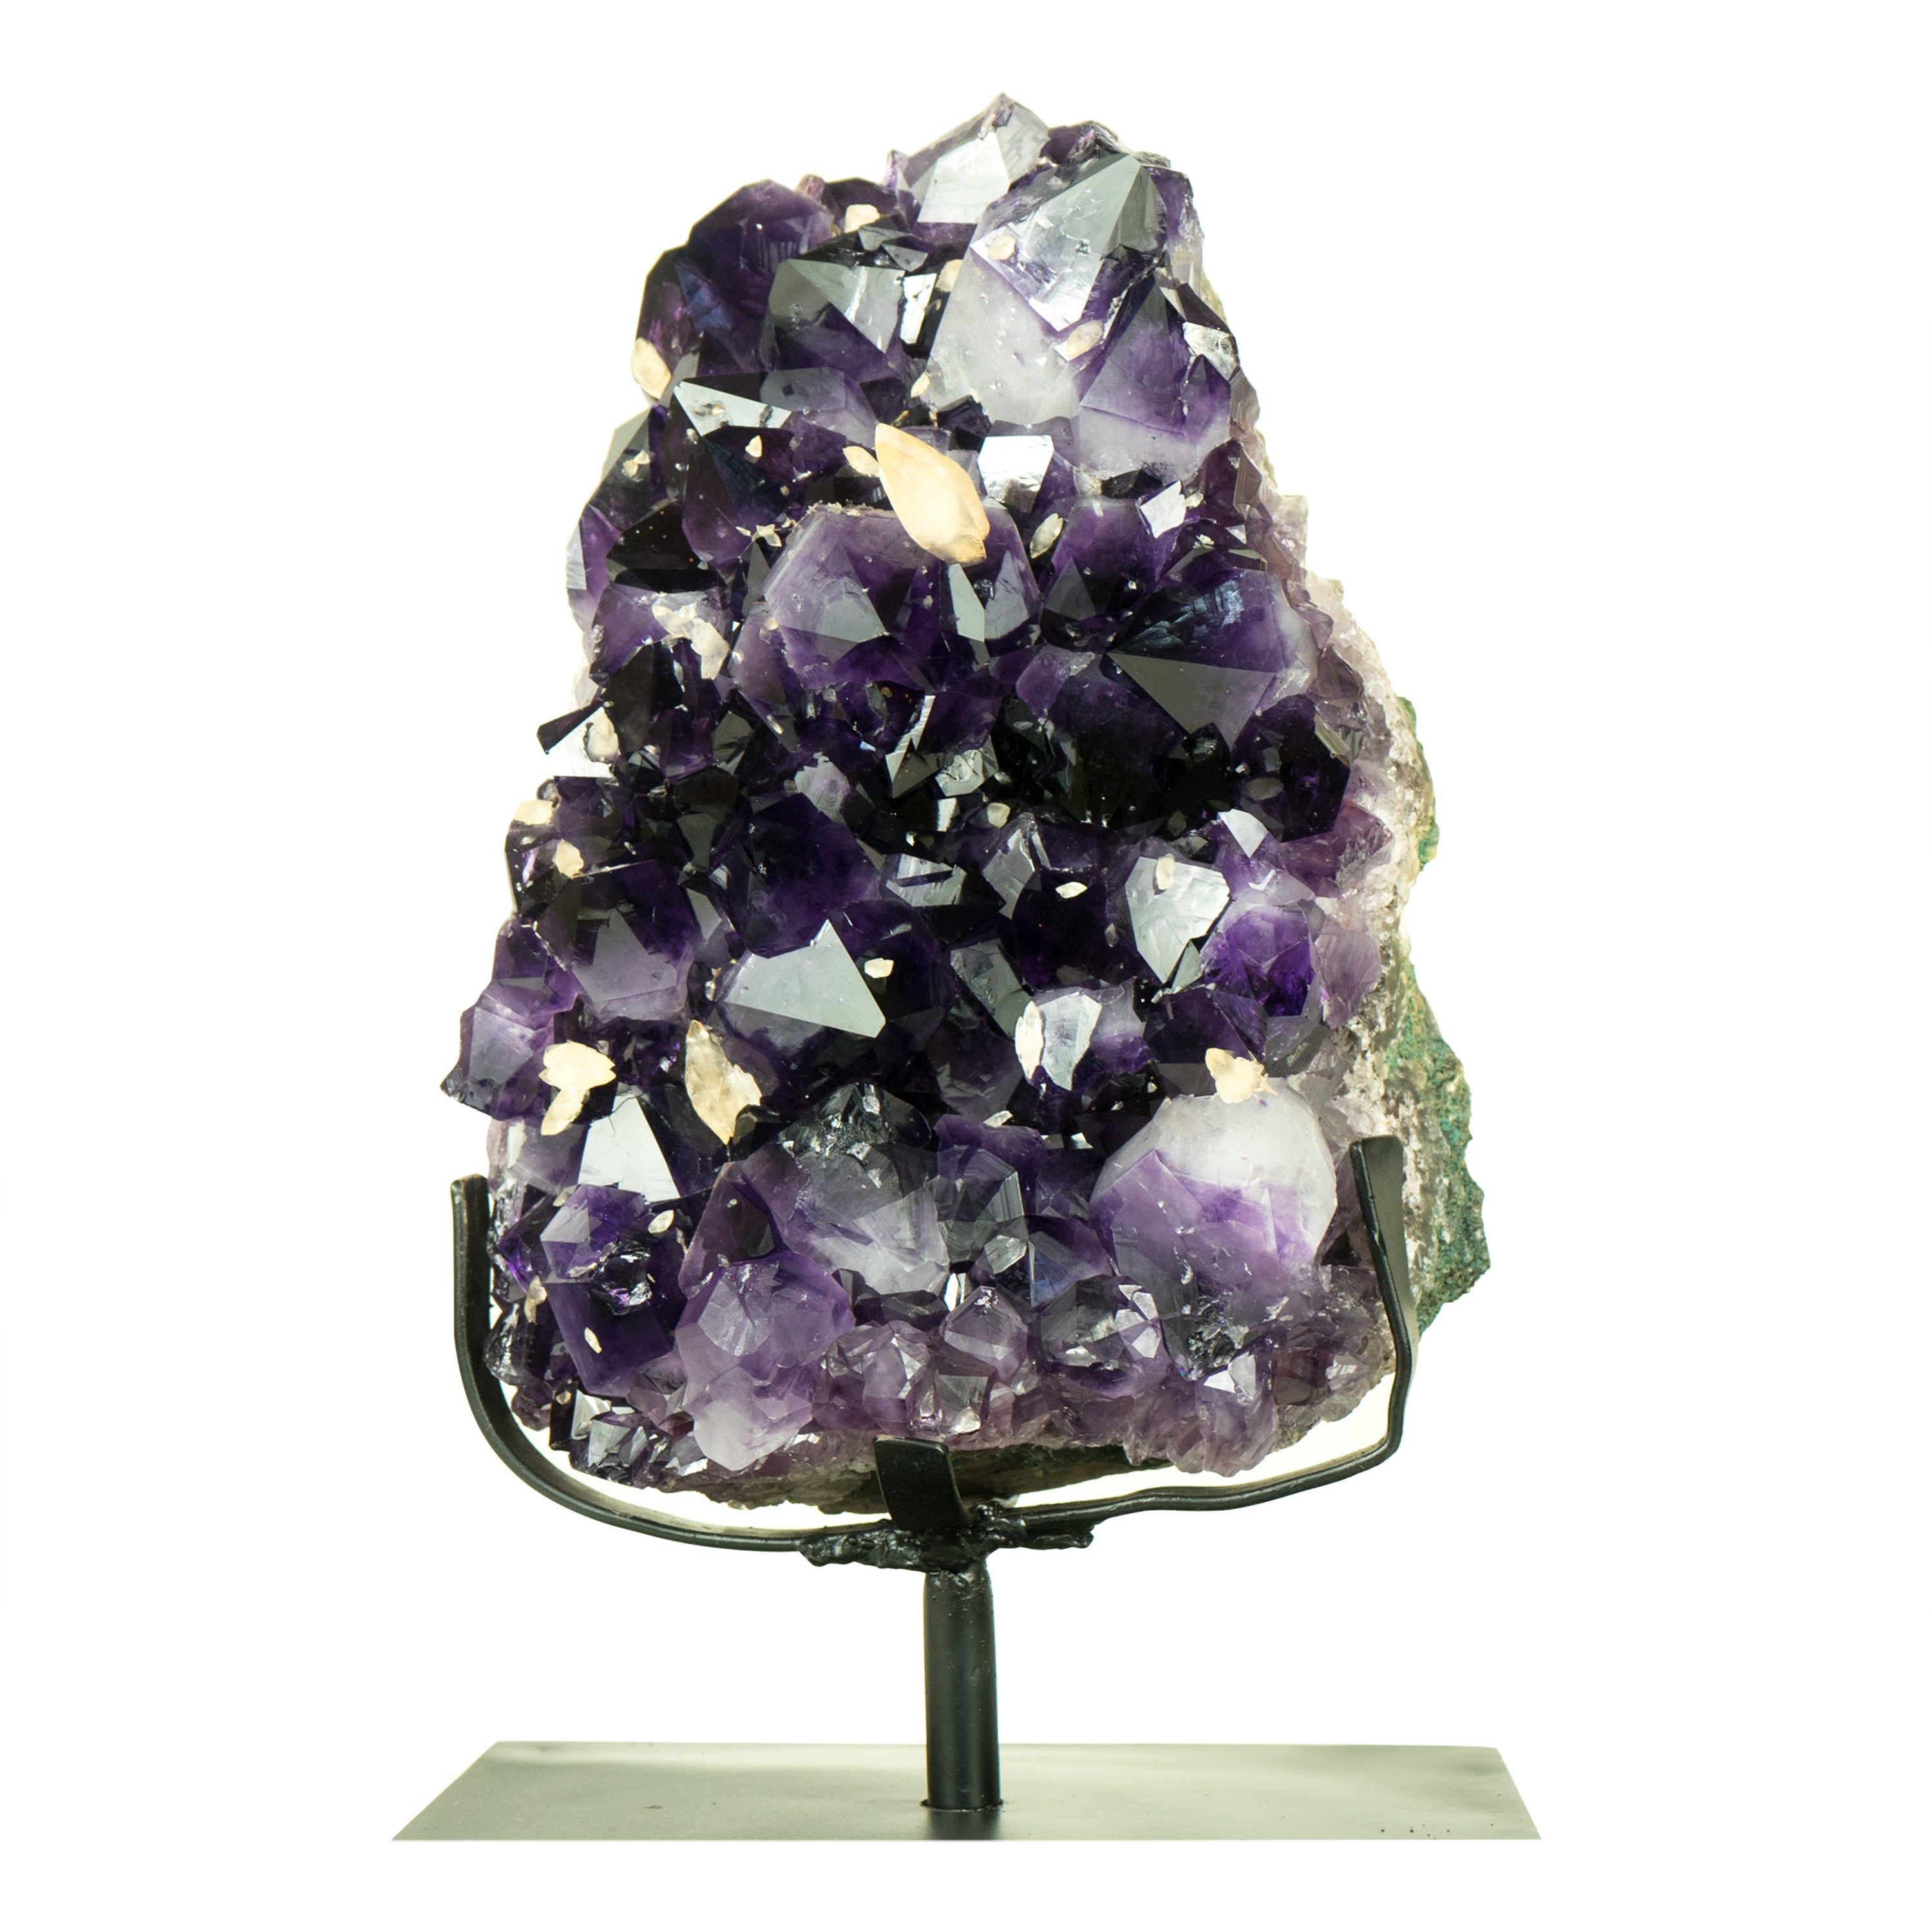 AAA Amethyst Cluster with Large Dark Purple Amethyst and Calcite Inclusions